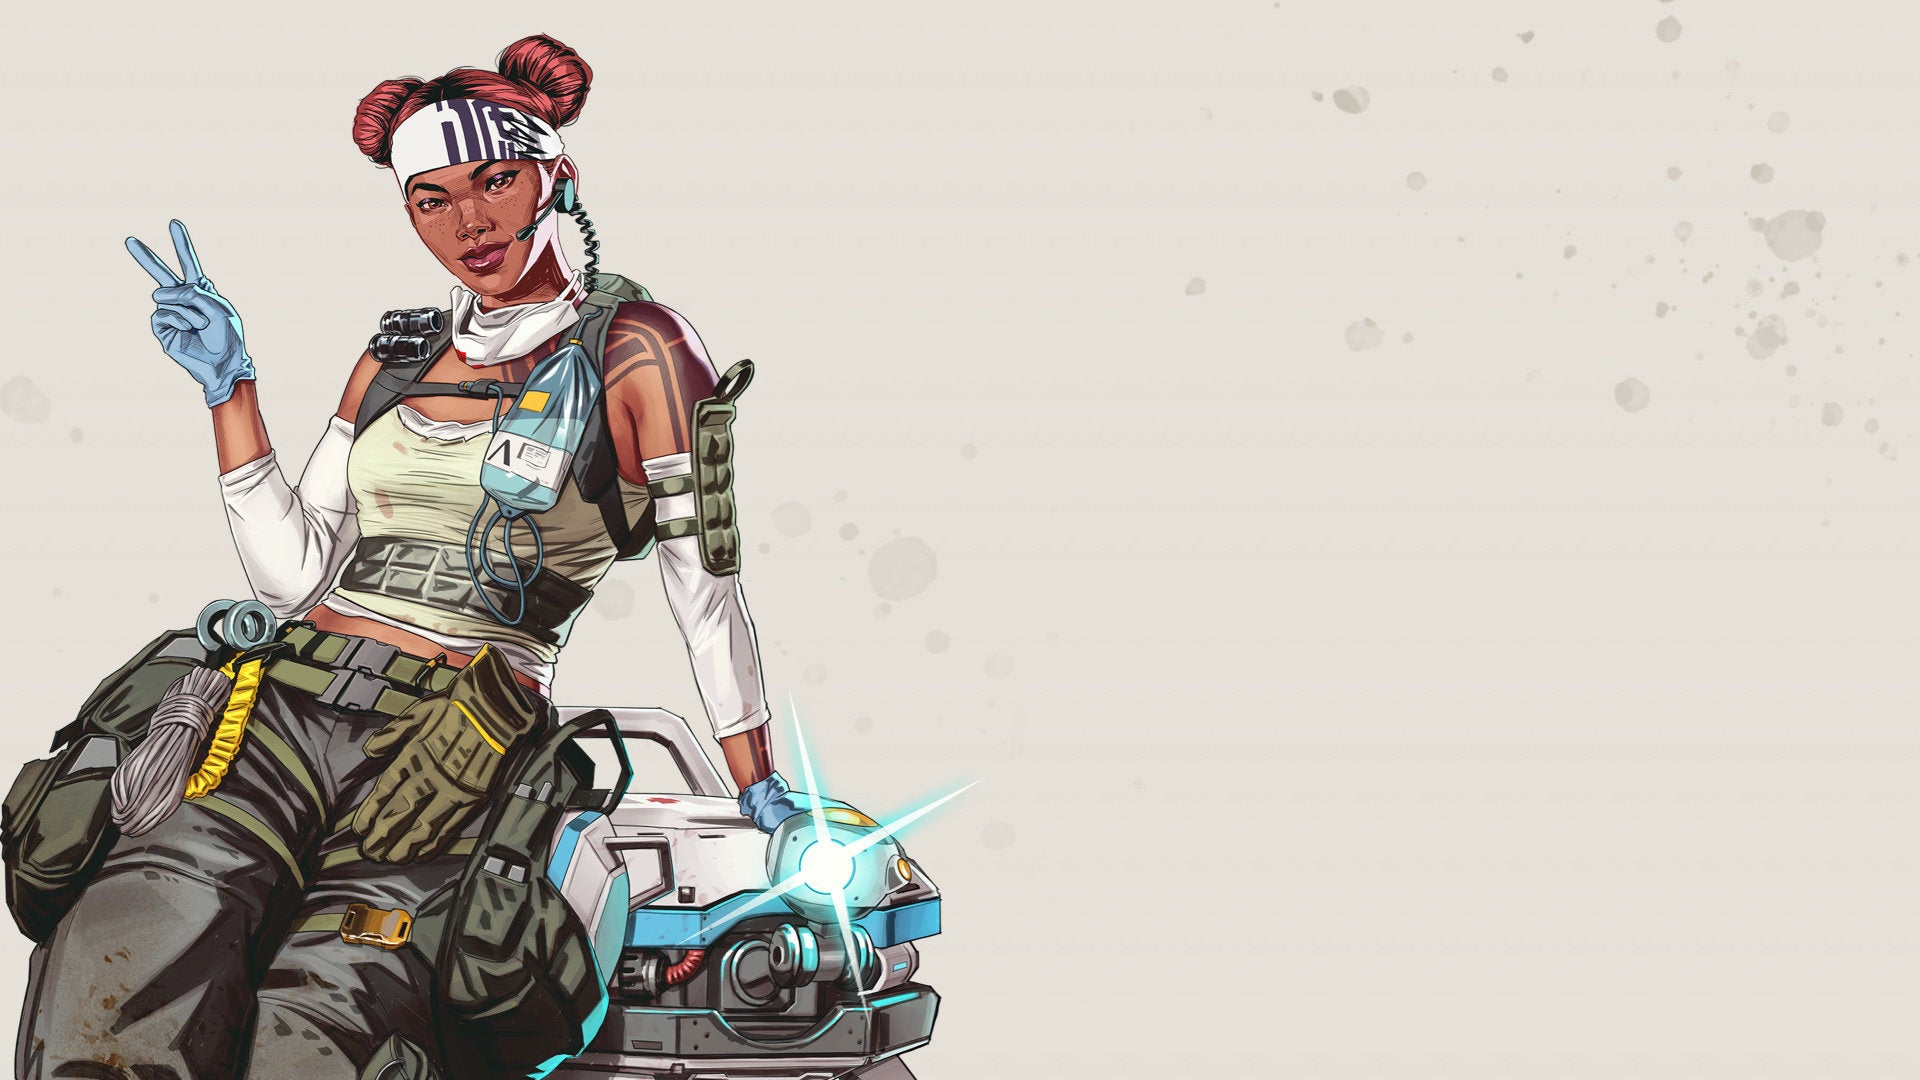 Official art of Lifeline, one of the Apex Legends characters.